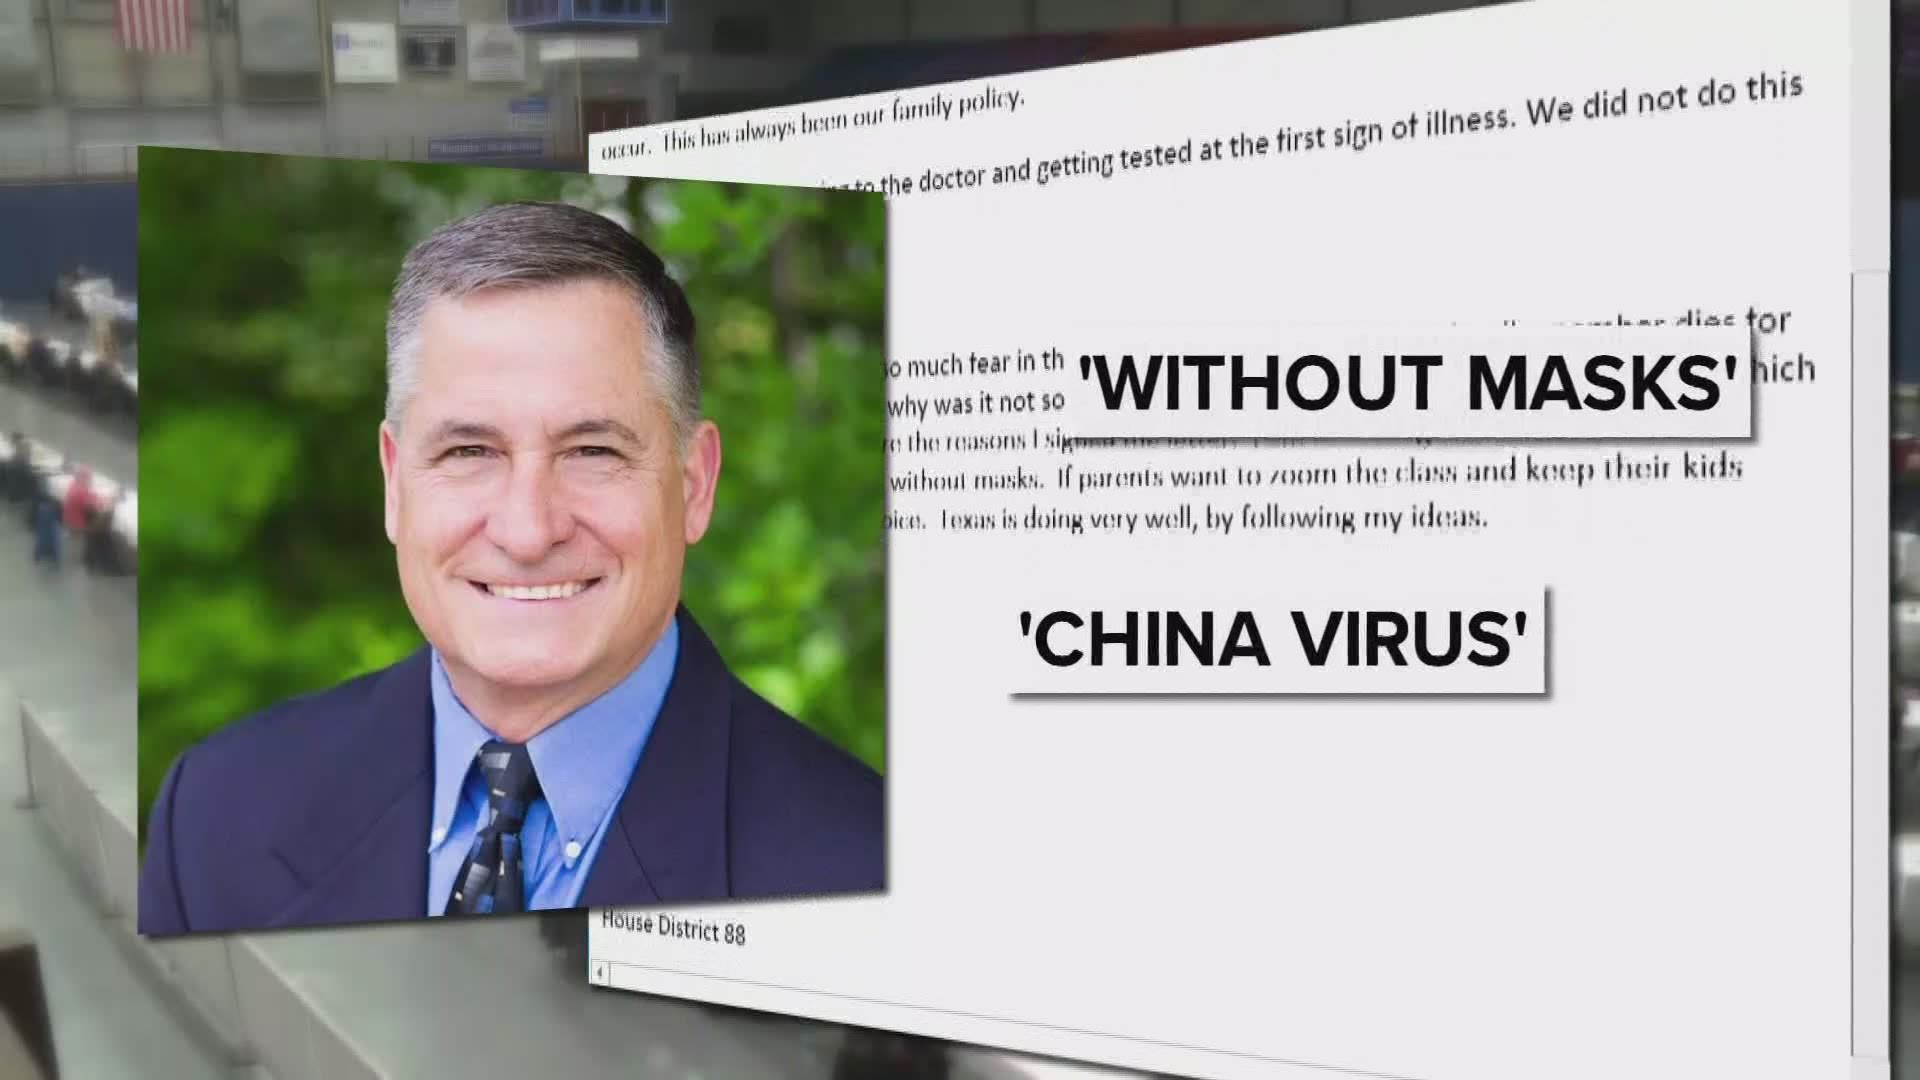 Republican representative Michael Lemelin referred to the coronavirus as the "China Virus" in an email response to Mainer.